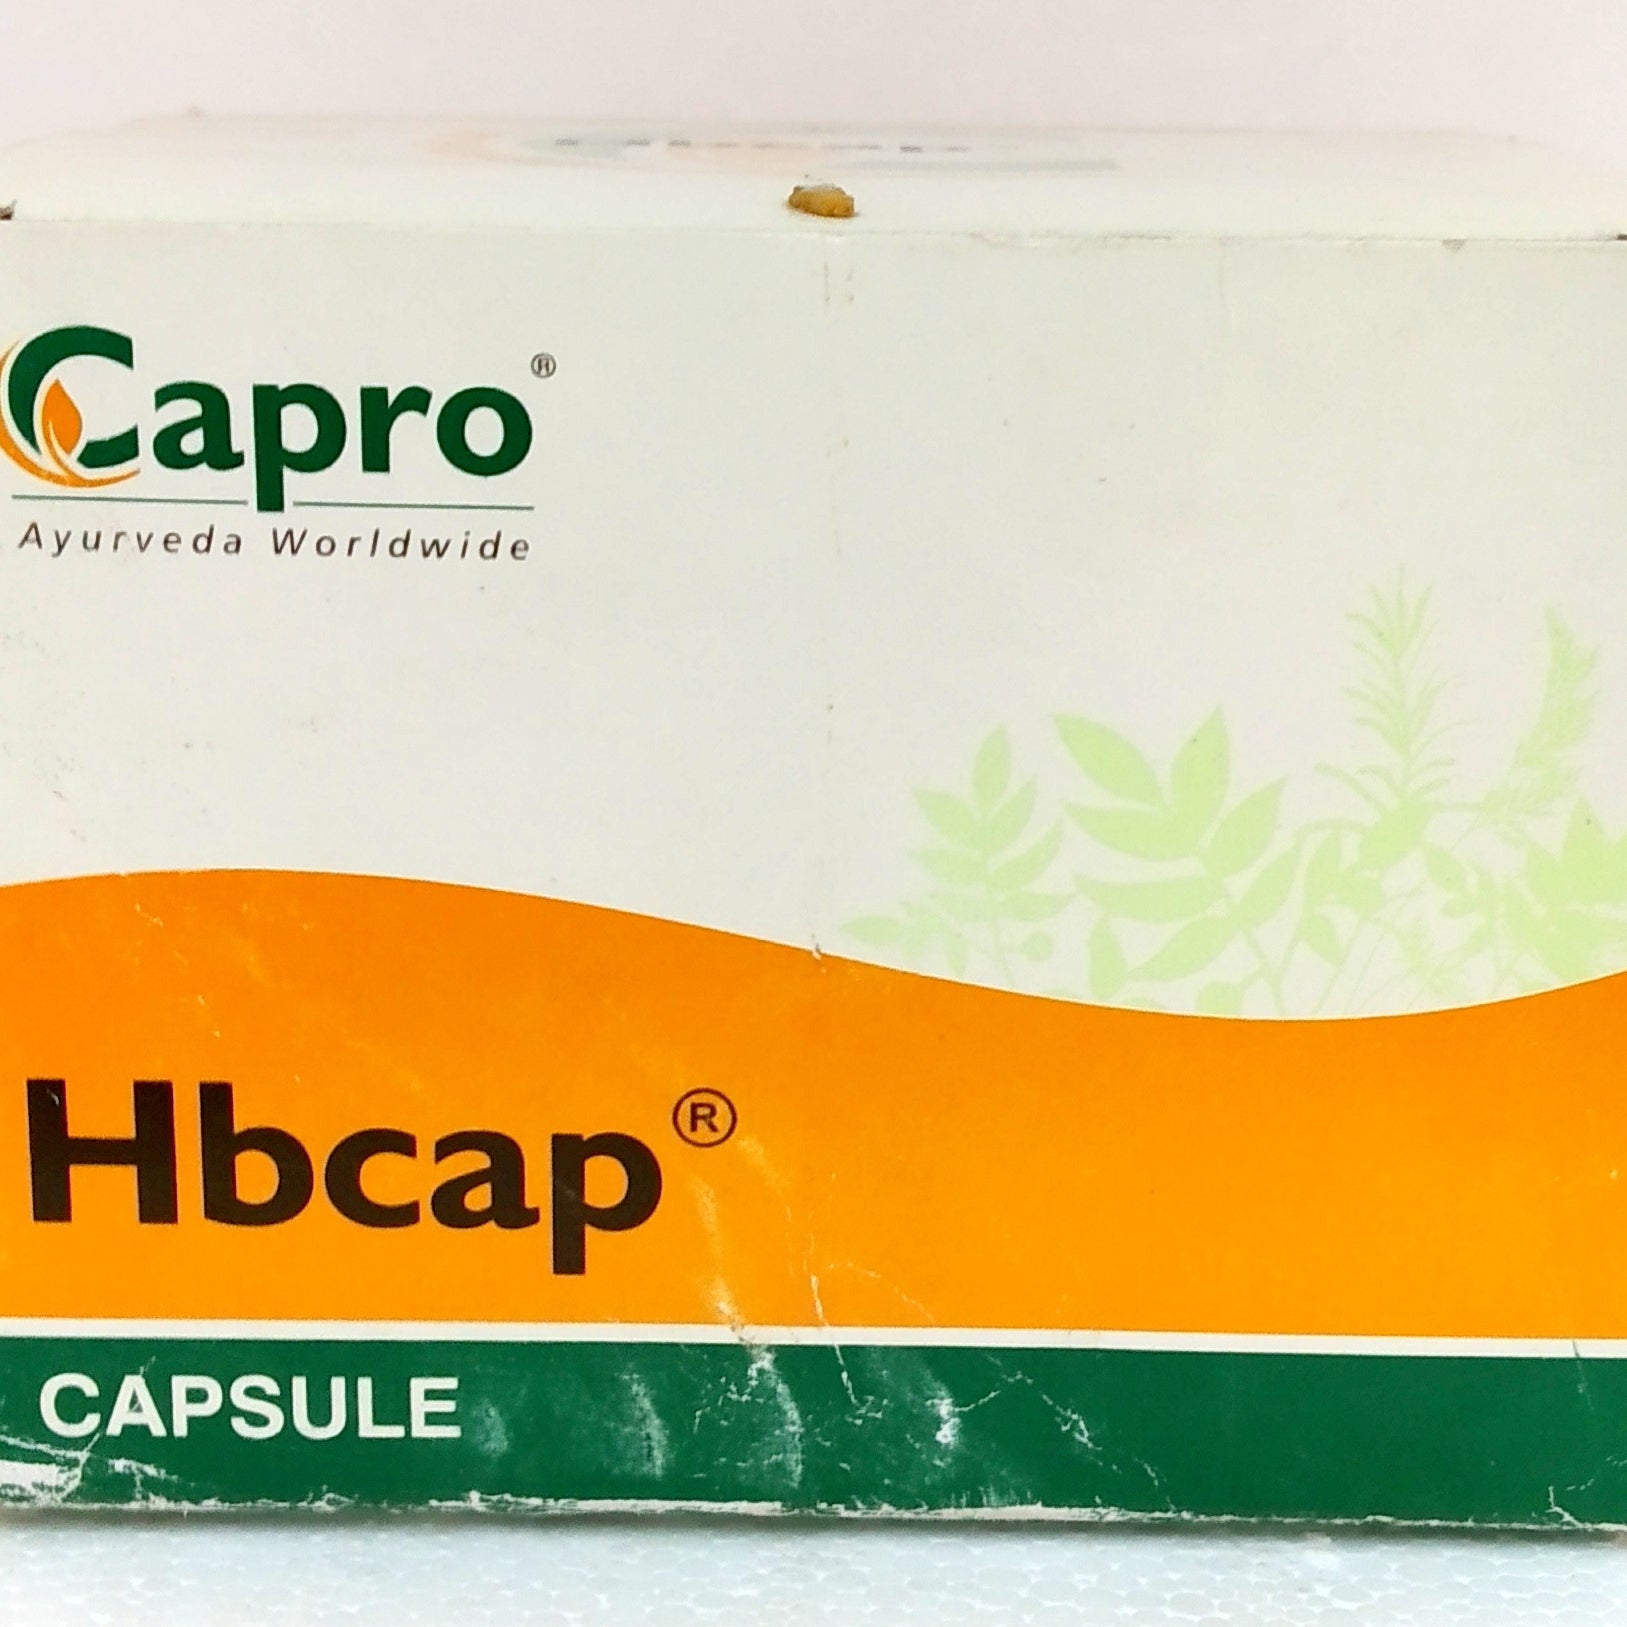 Shop Hbcap 10Capsules at price 45.00 from Capro Online - Ayush Care